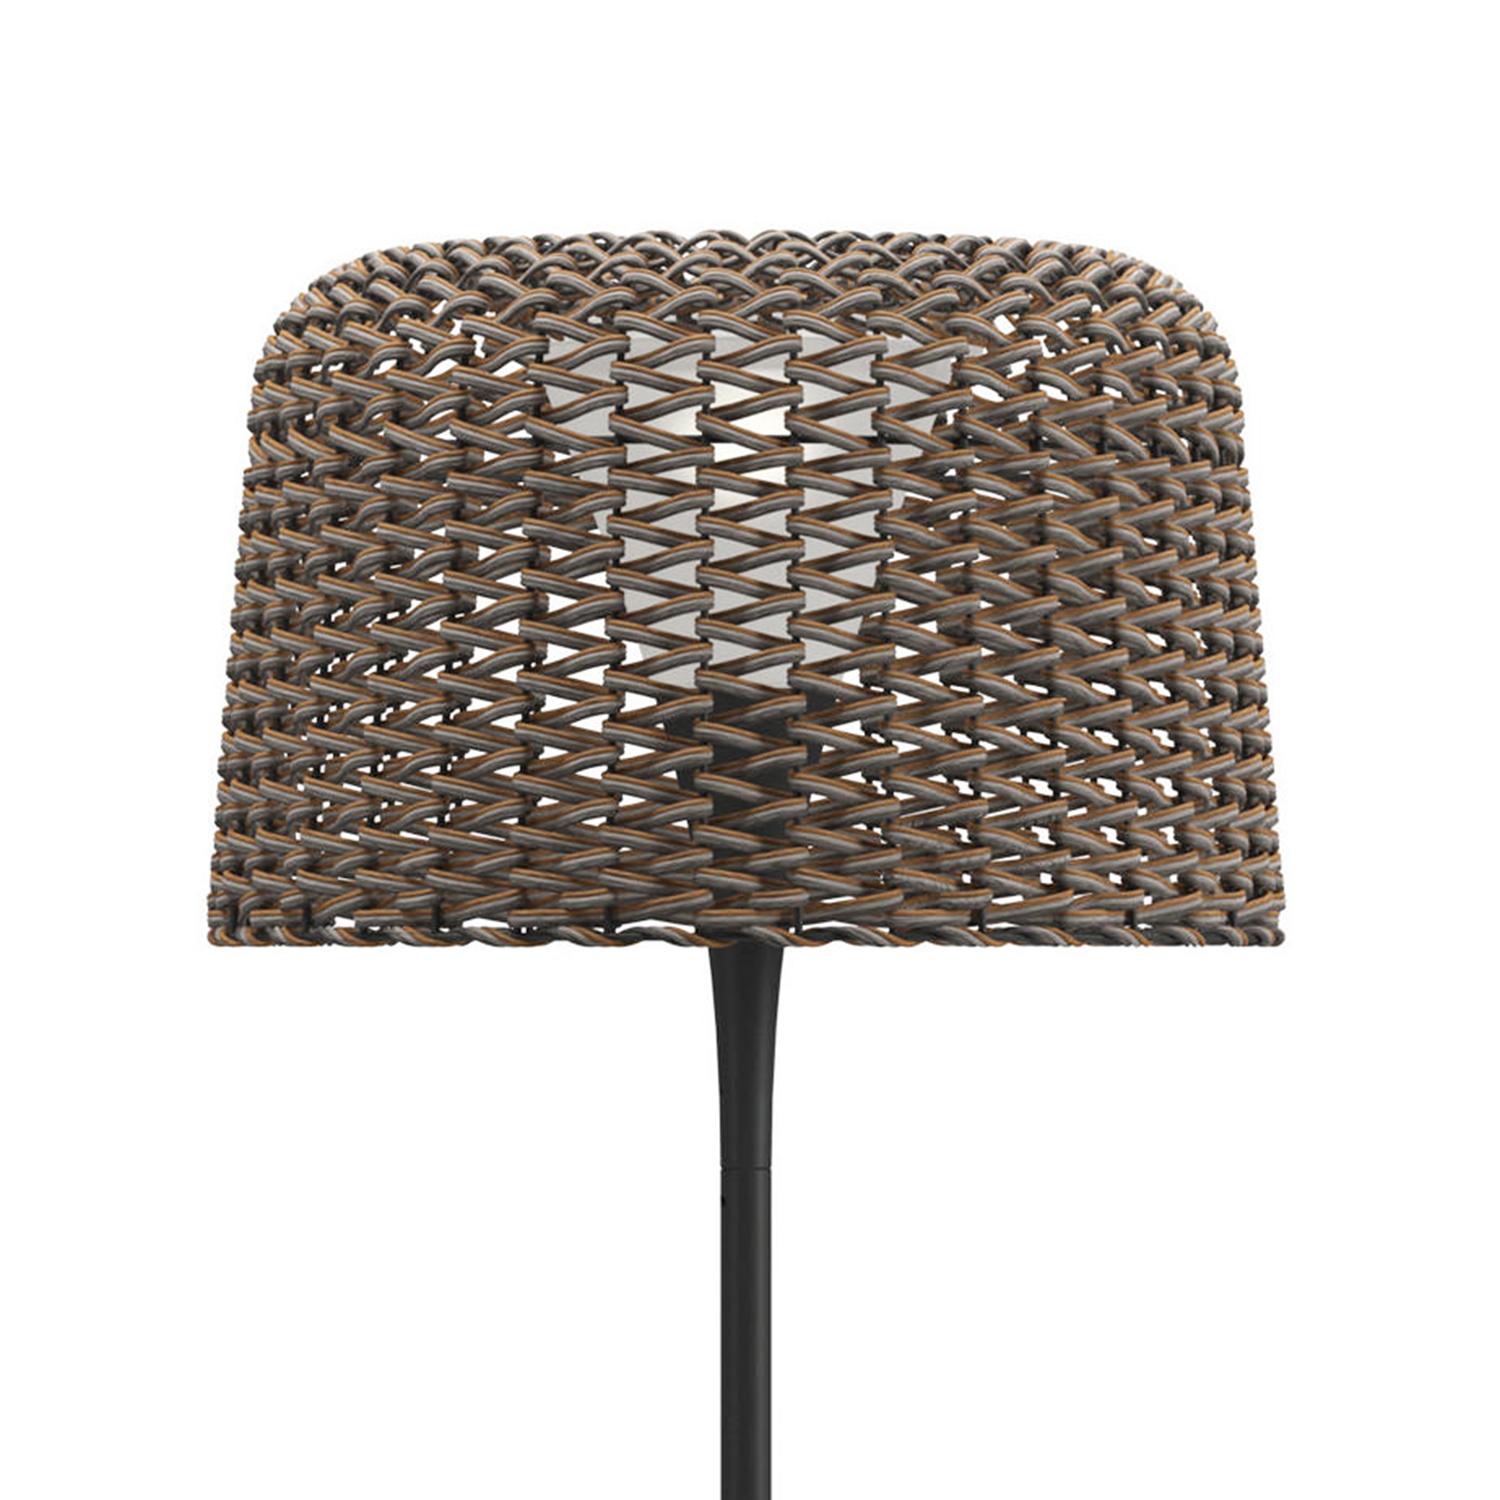 Floor Lamp Wicker Outdoor Black with wicker outdoor woven
lampshade in brown finish, with aluminium anthracite powder-coated
structure and teak trim on base edge. With solar and mains power 
rechargable LED light unit. Adaptor Output 4.2V. 65ft